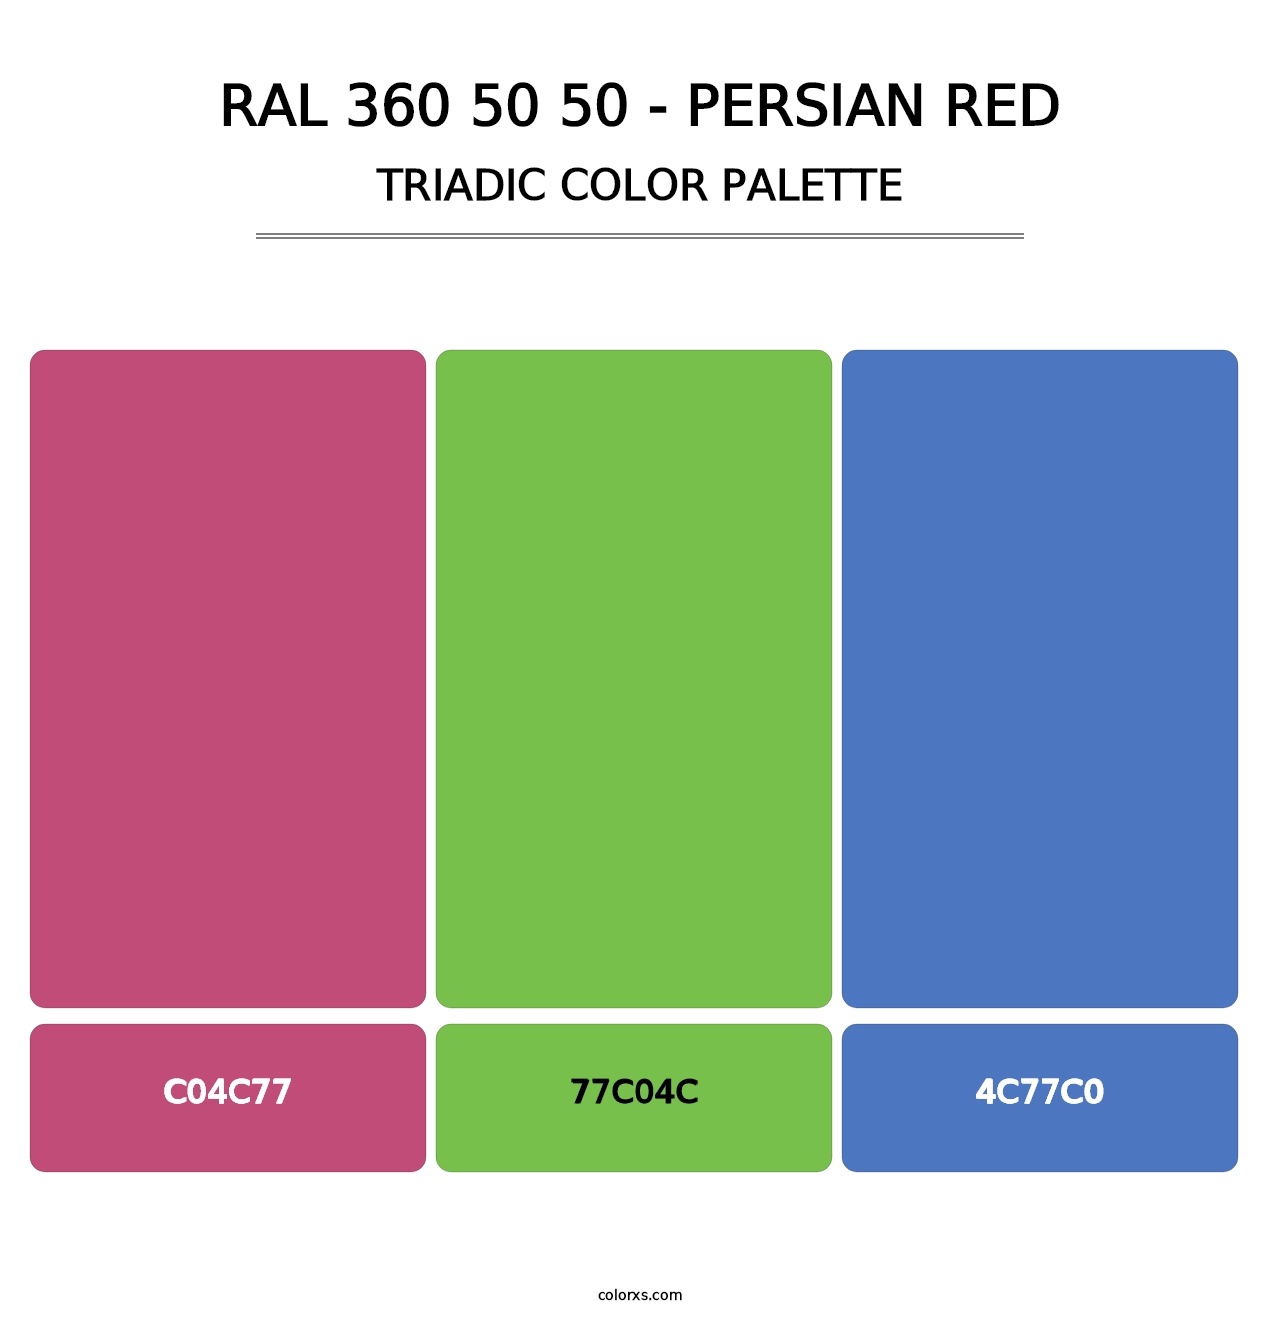 RAL 360 50 50 - Persian Red - Triadic Color Palette